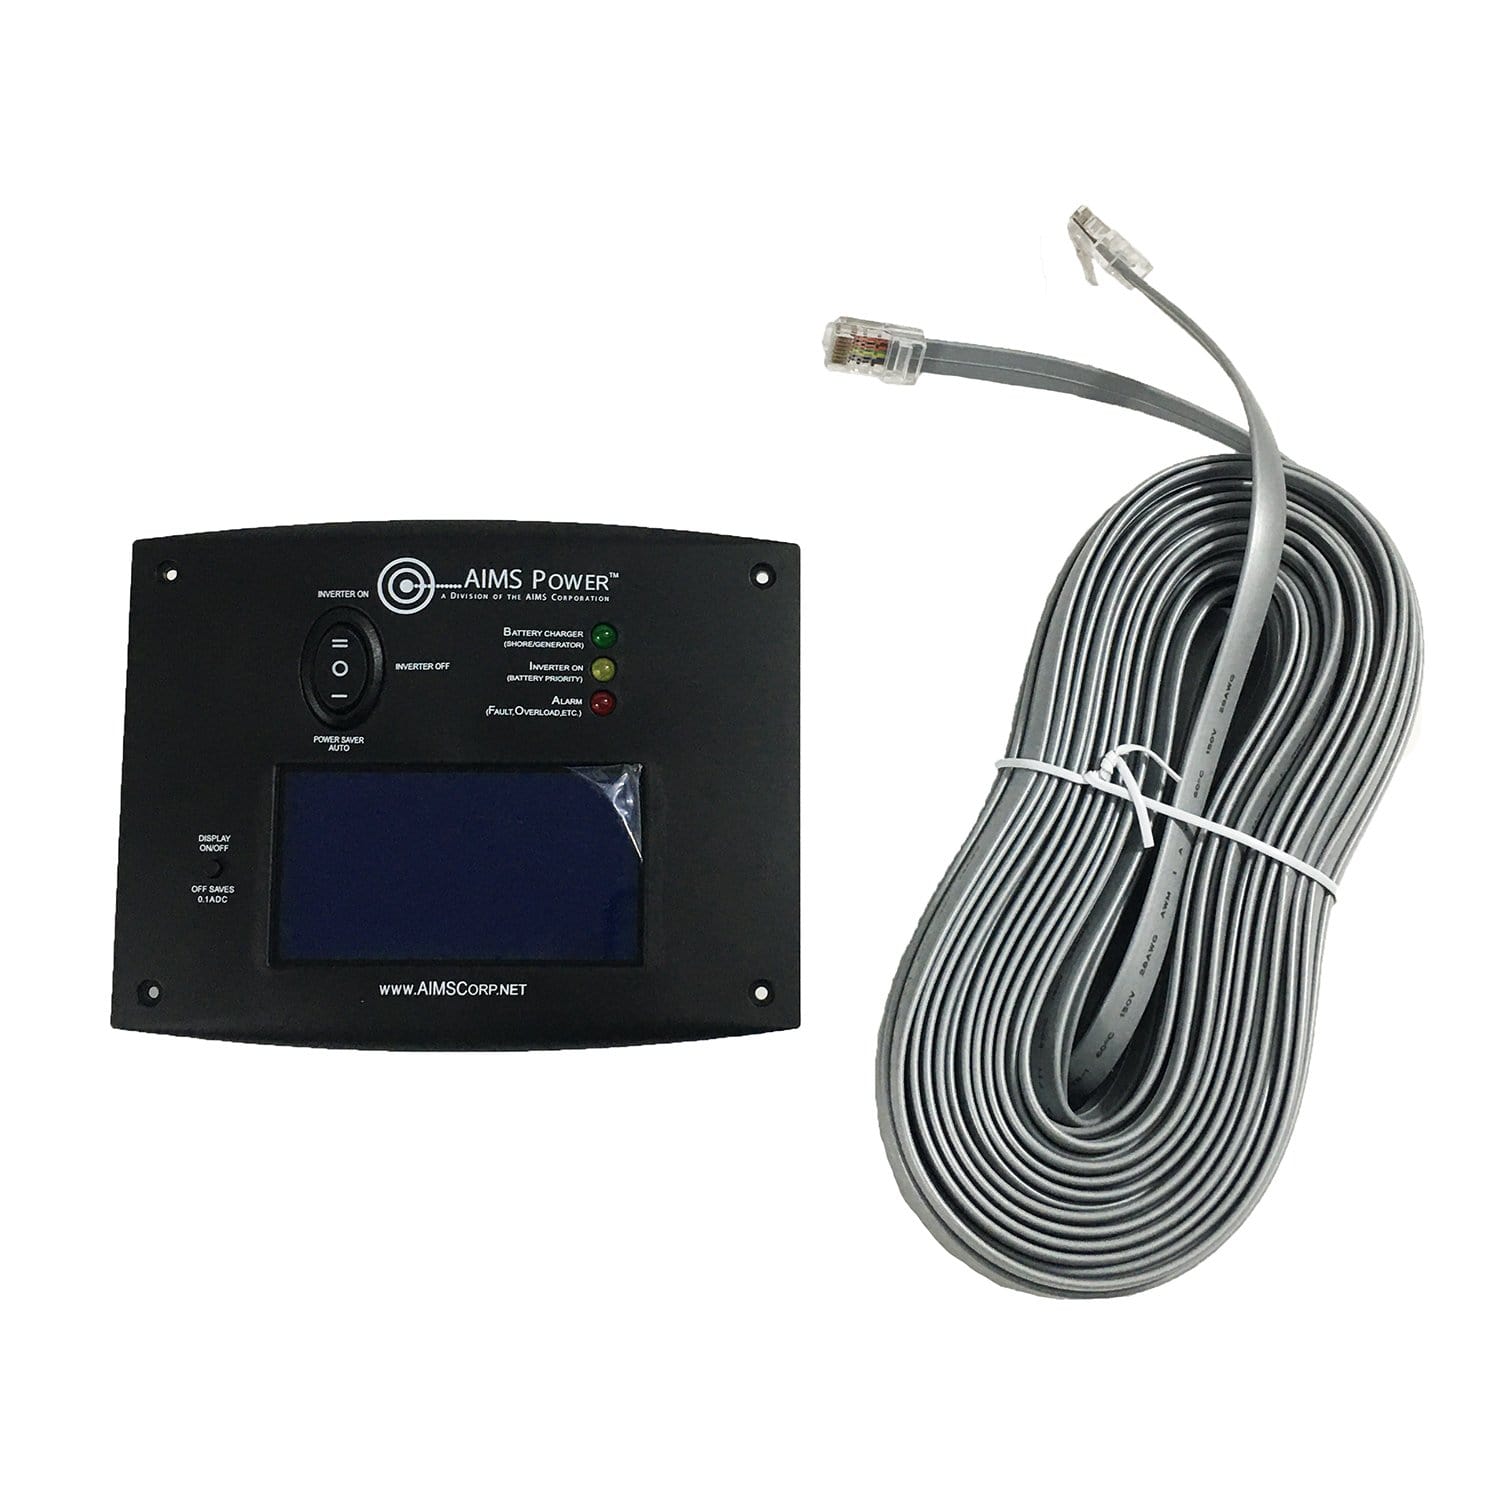 AIMS REMOTELF LCD Remote Panel for GLF Models